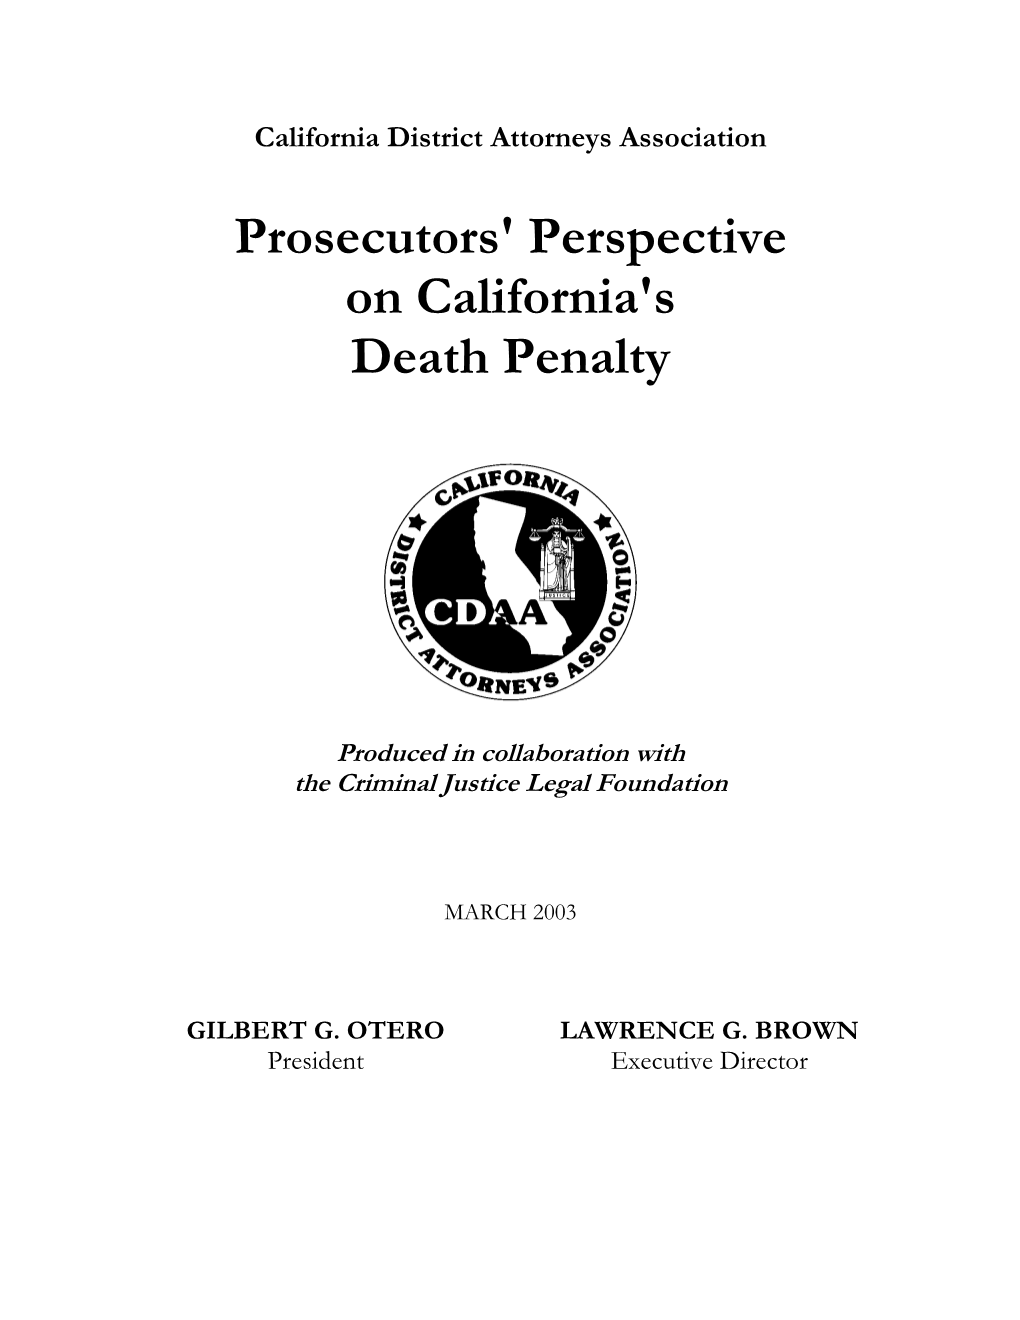 Prosecutors' Perspective on California's Death Penalty